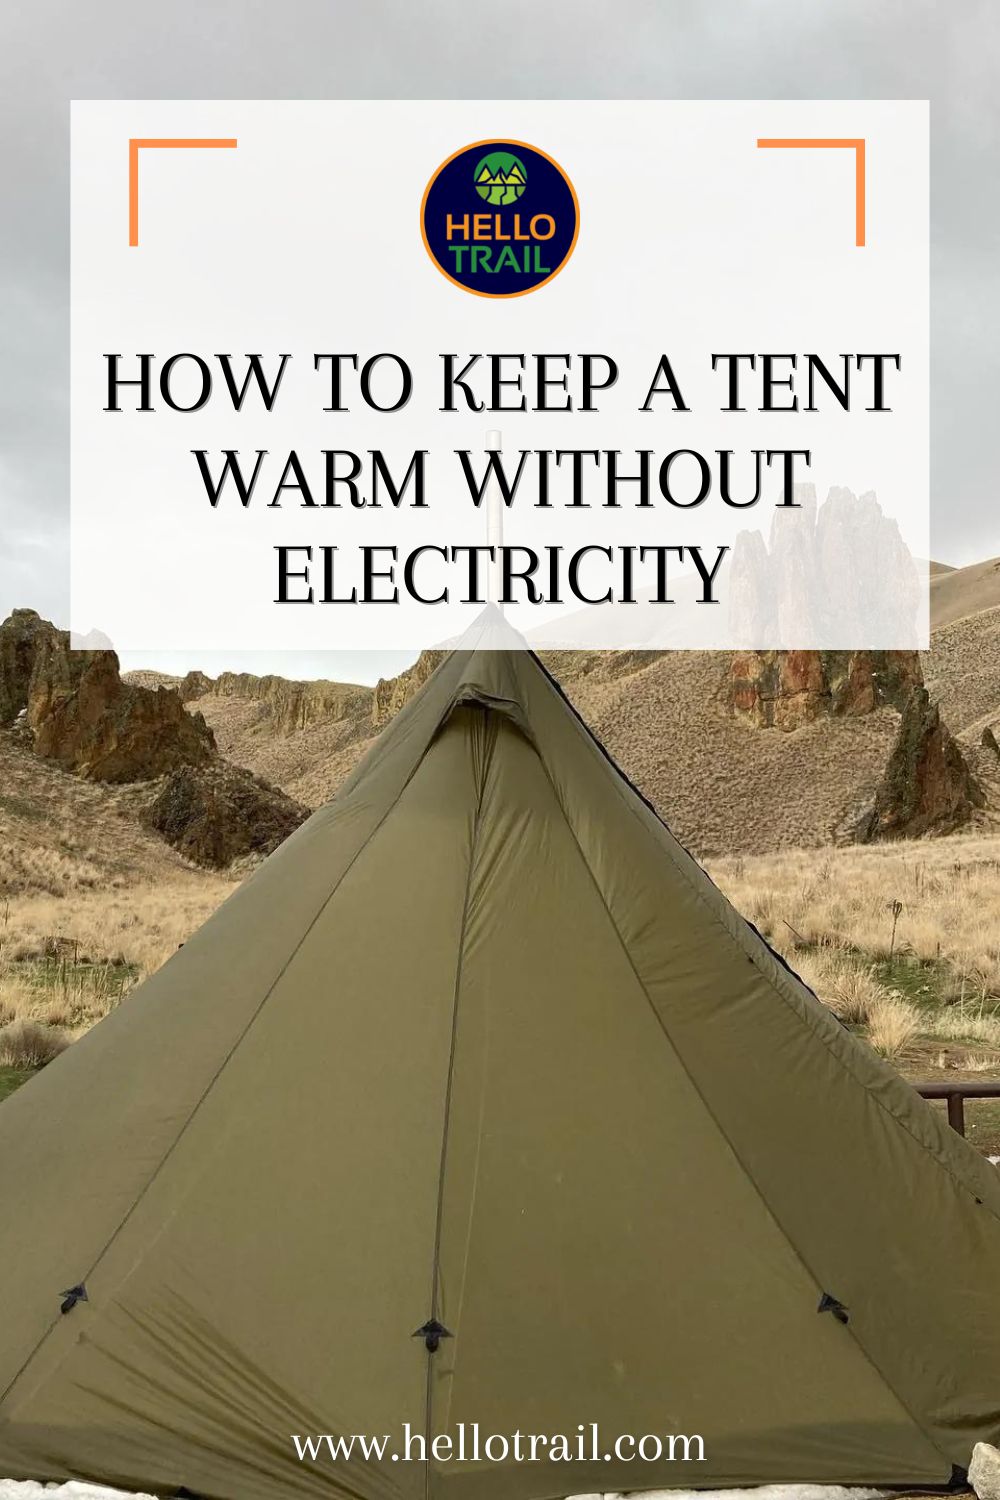 Tents like this canvas tent can help keep you warm